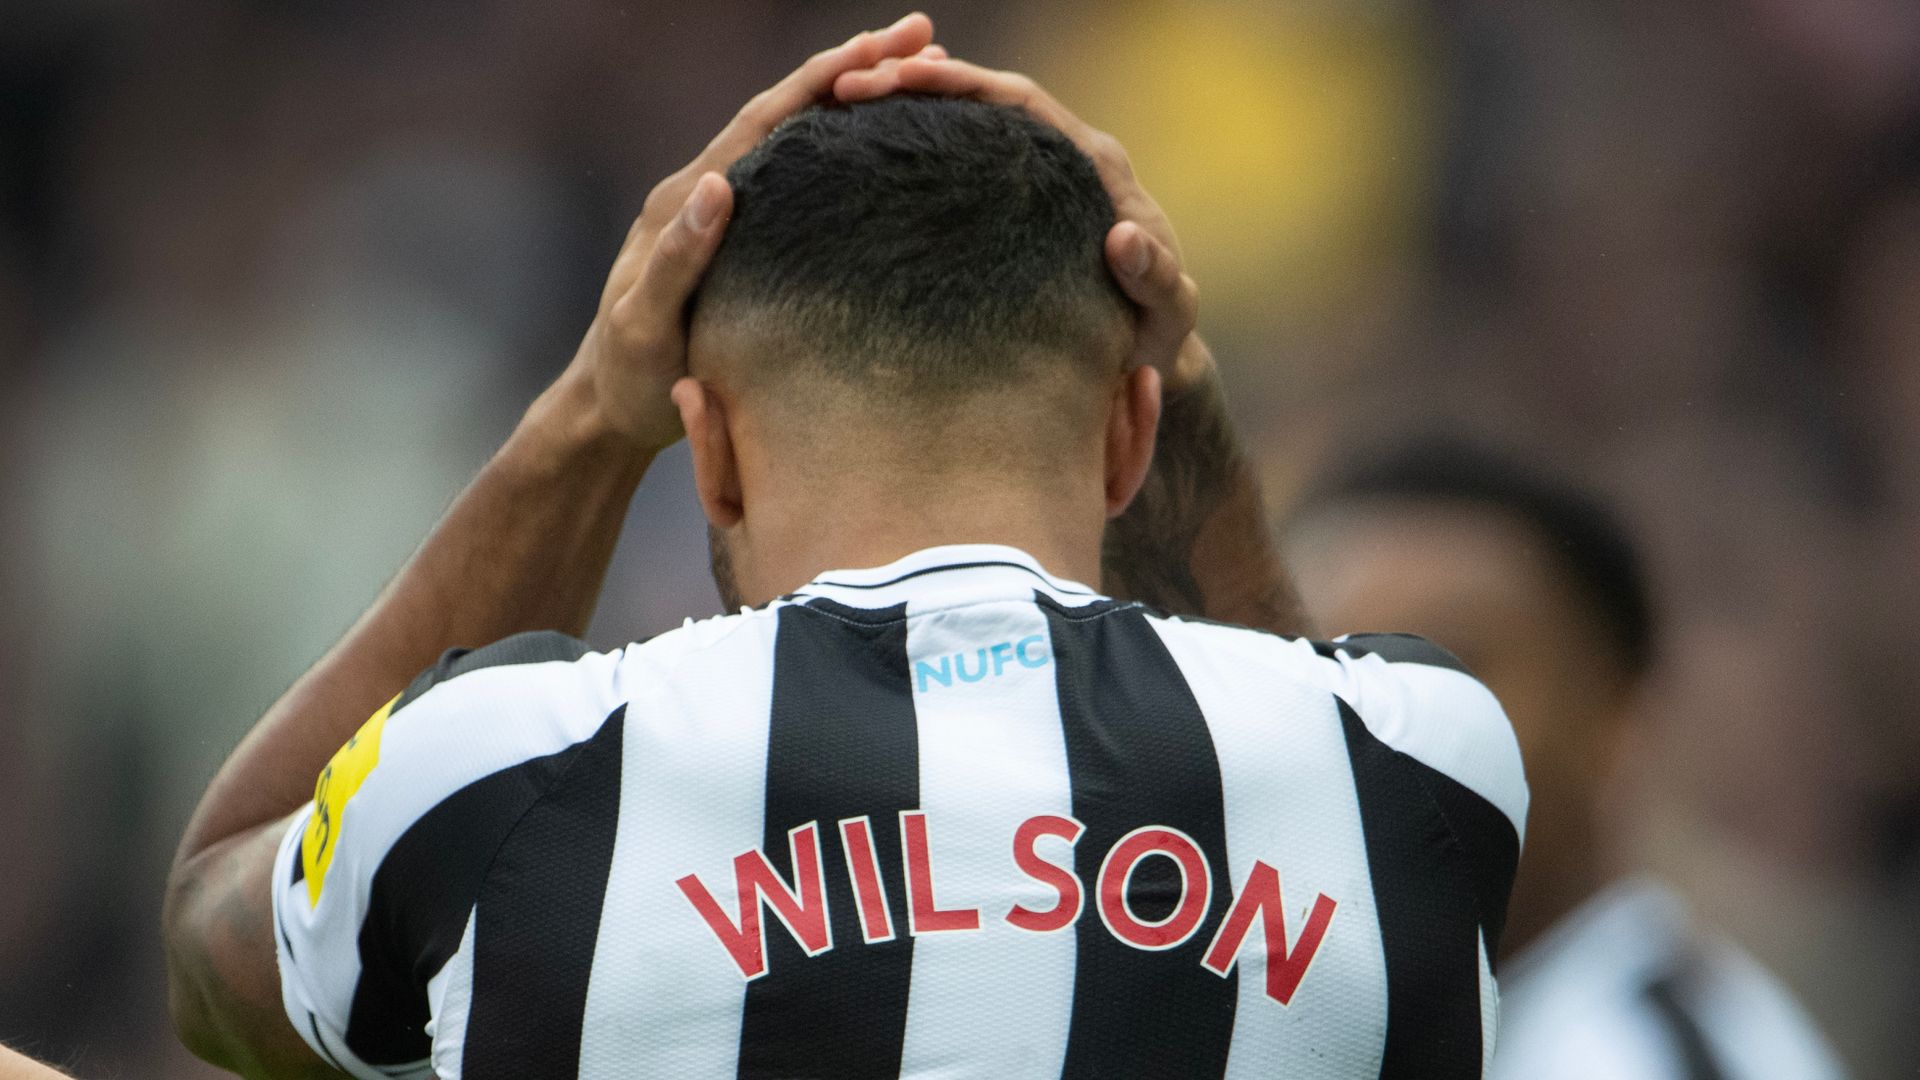 Why have the goals dried up at Newcastle?